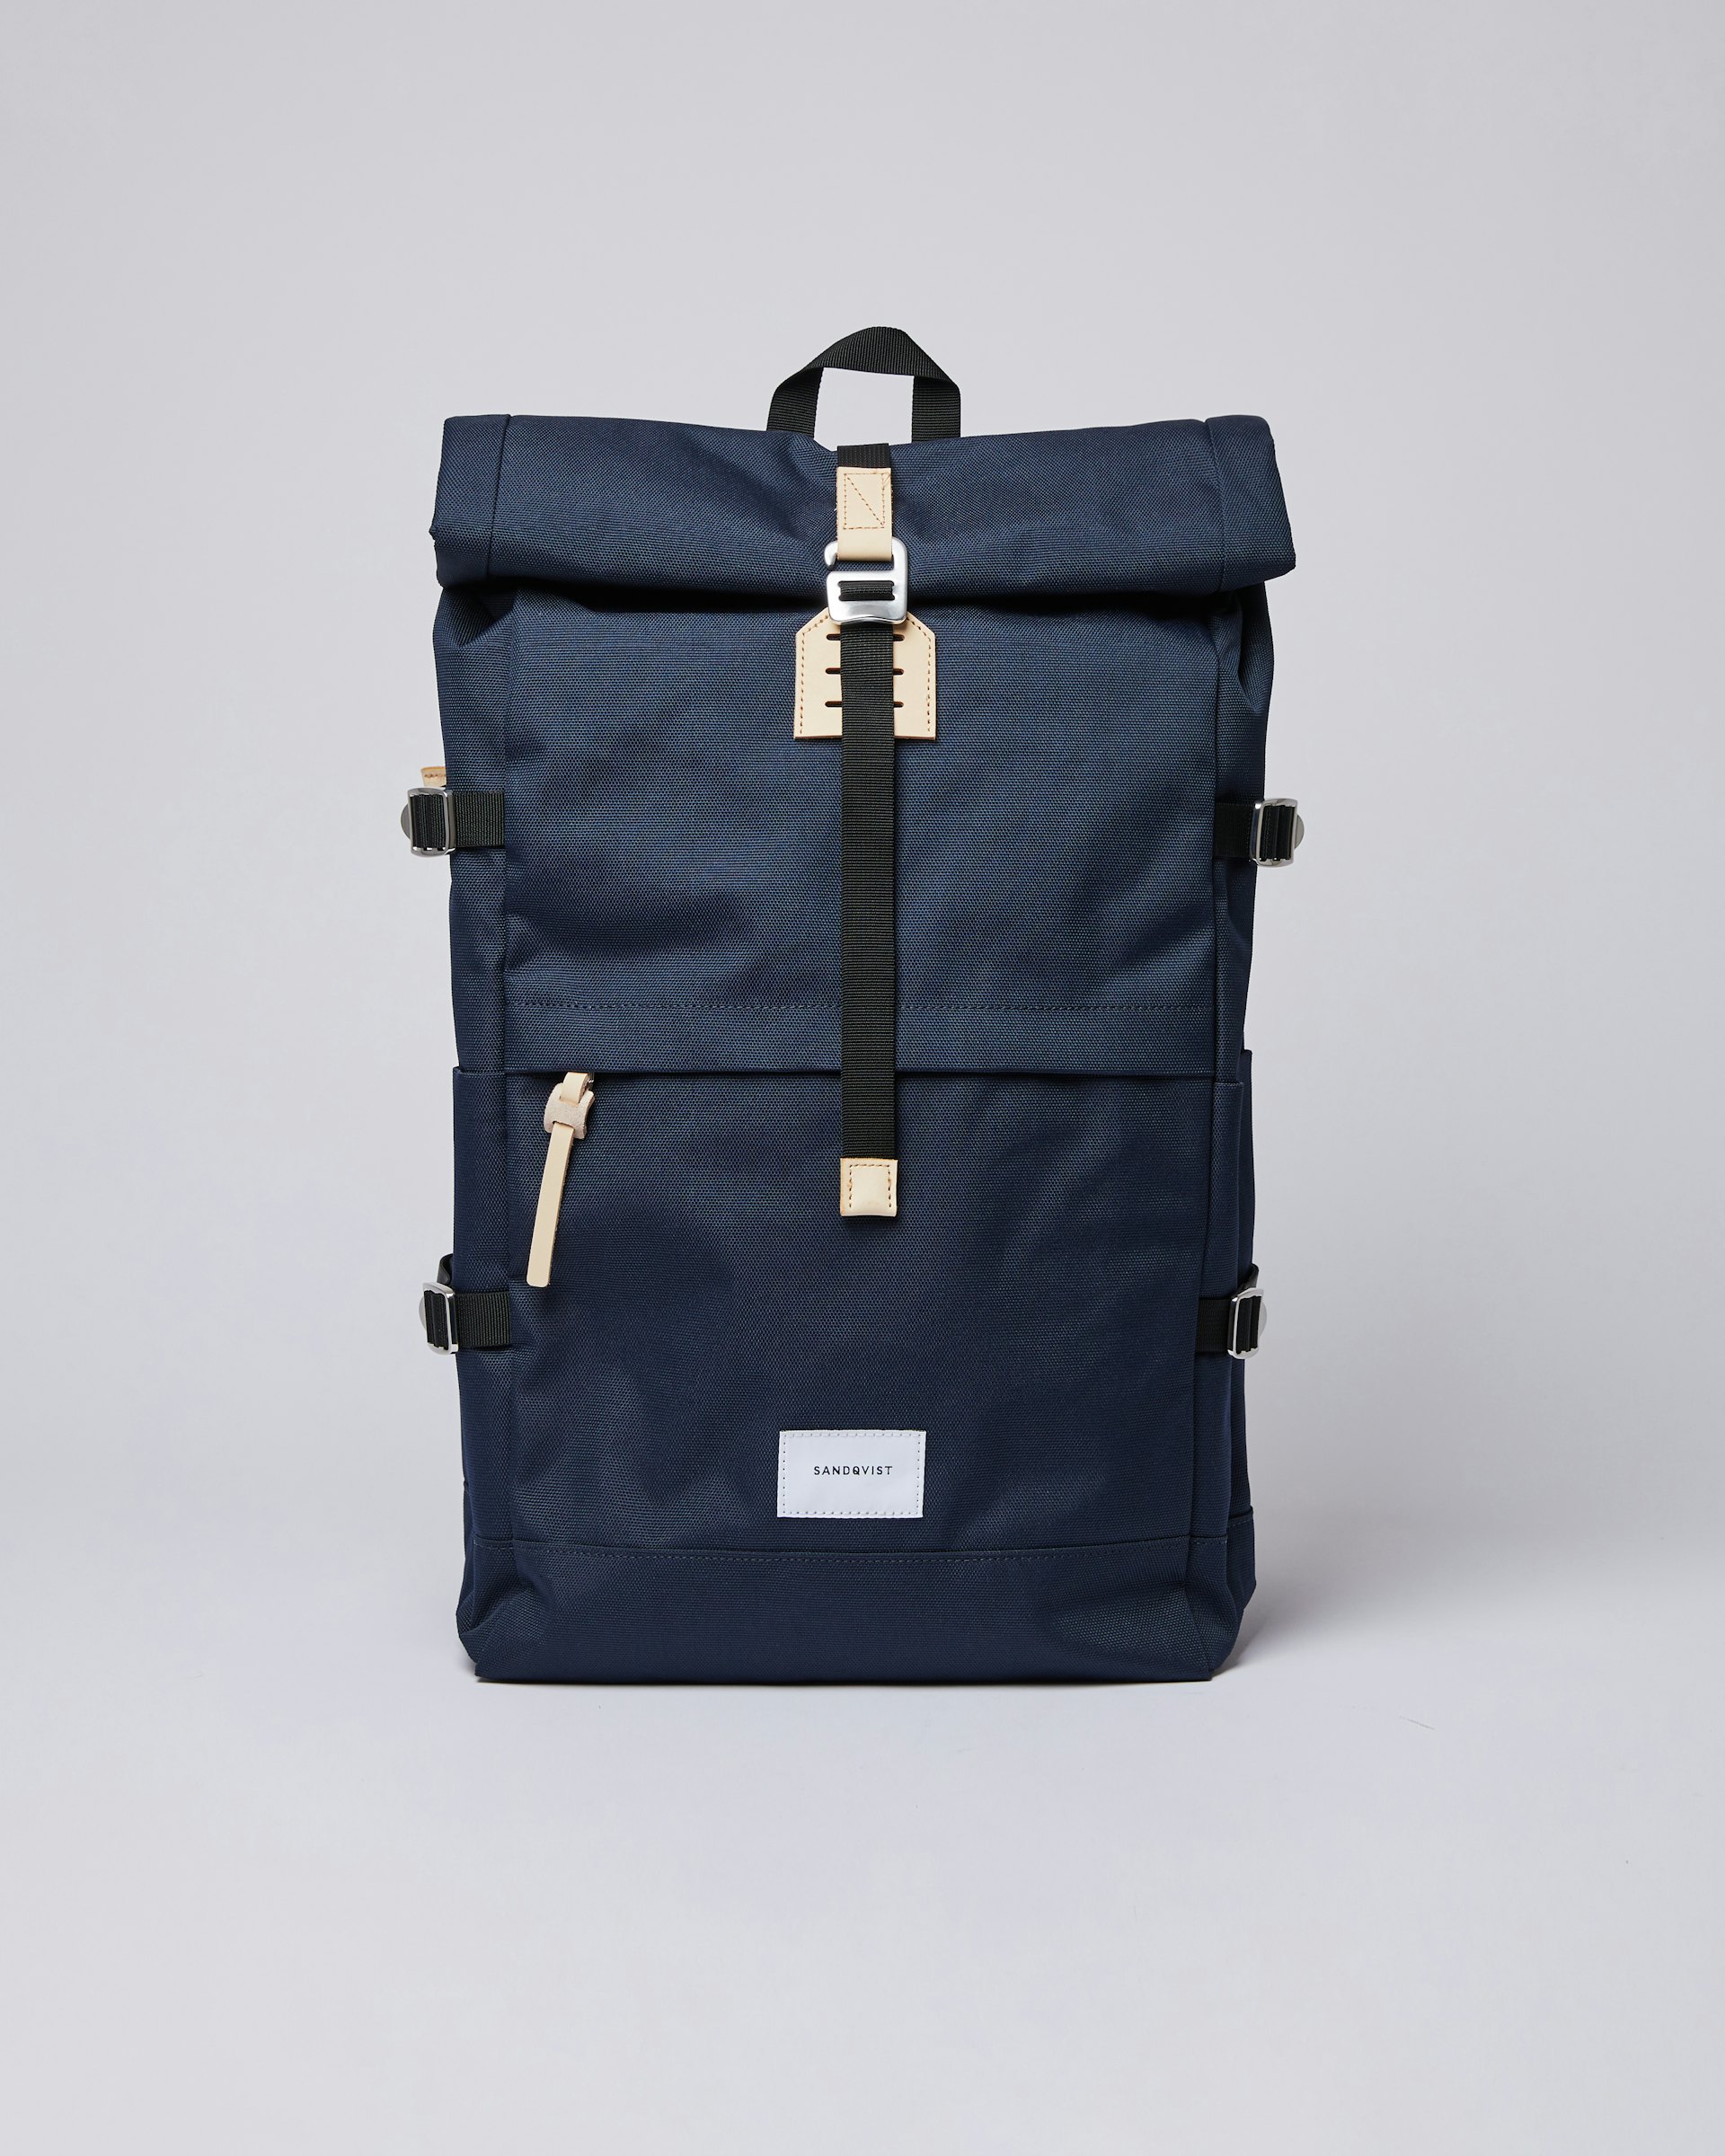 Bernt belongs to the category Backpacks and is in color navy